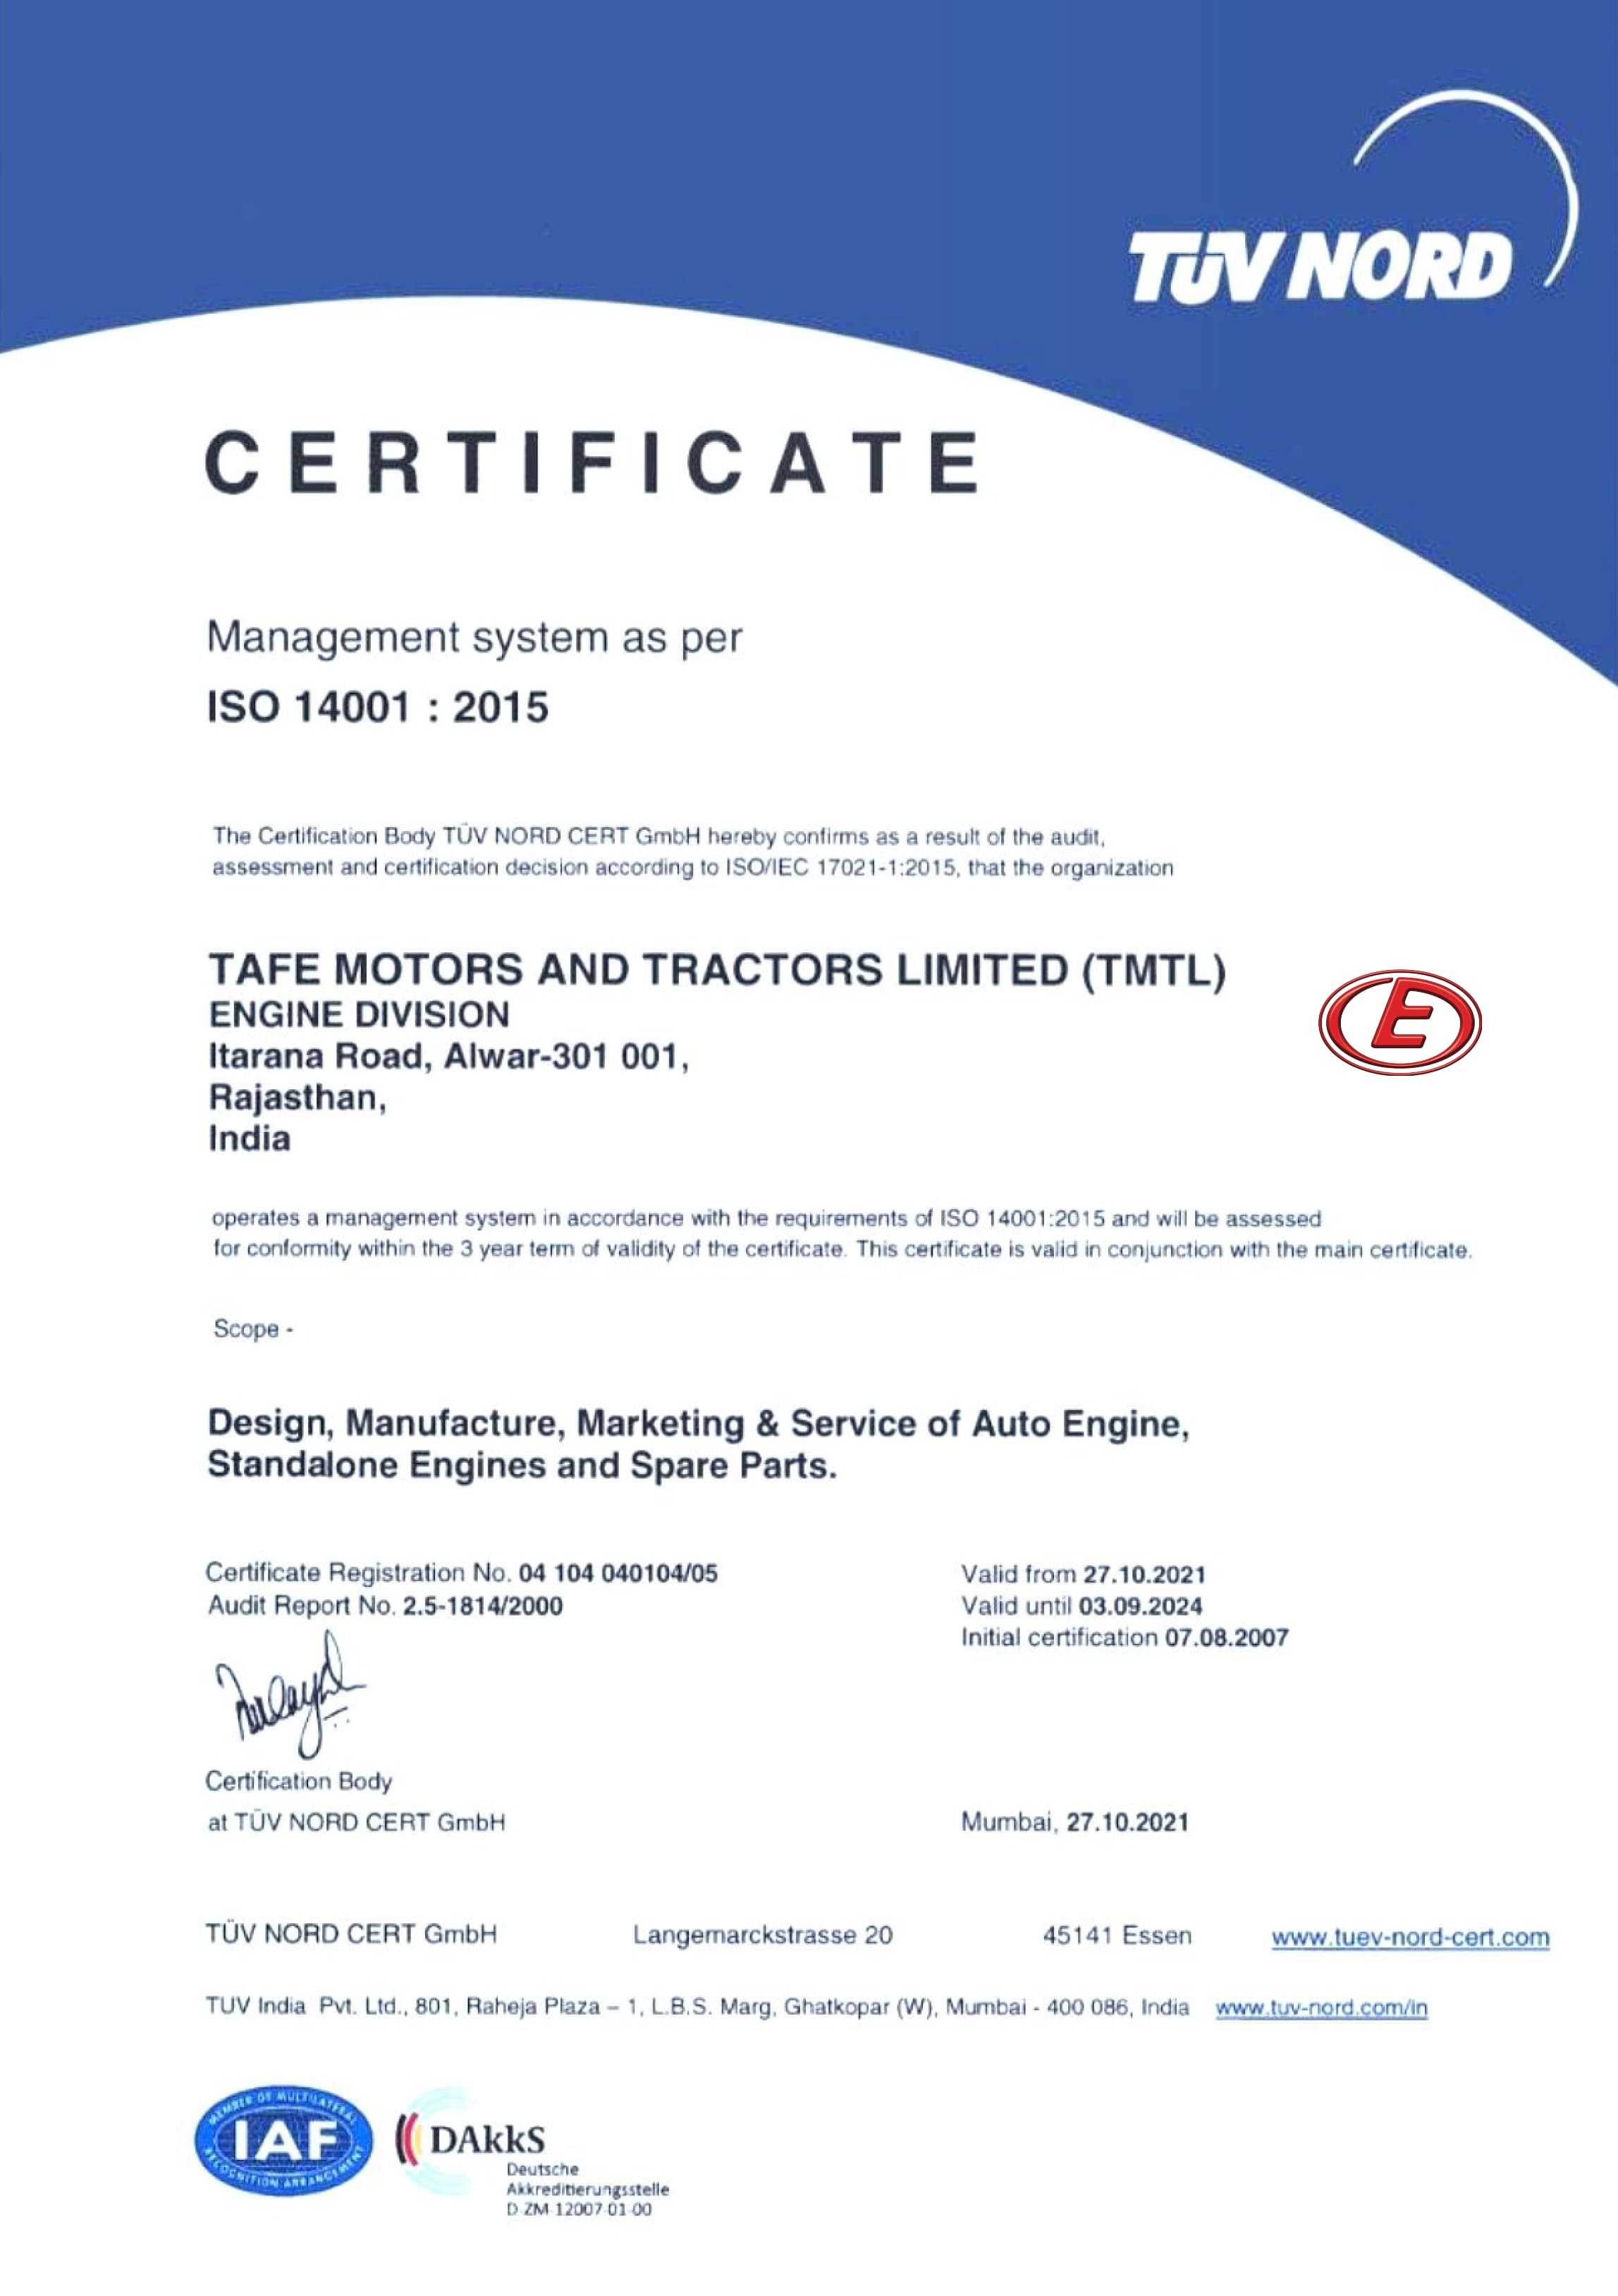 Tafe power ISO 14001 certified for powerful engine